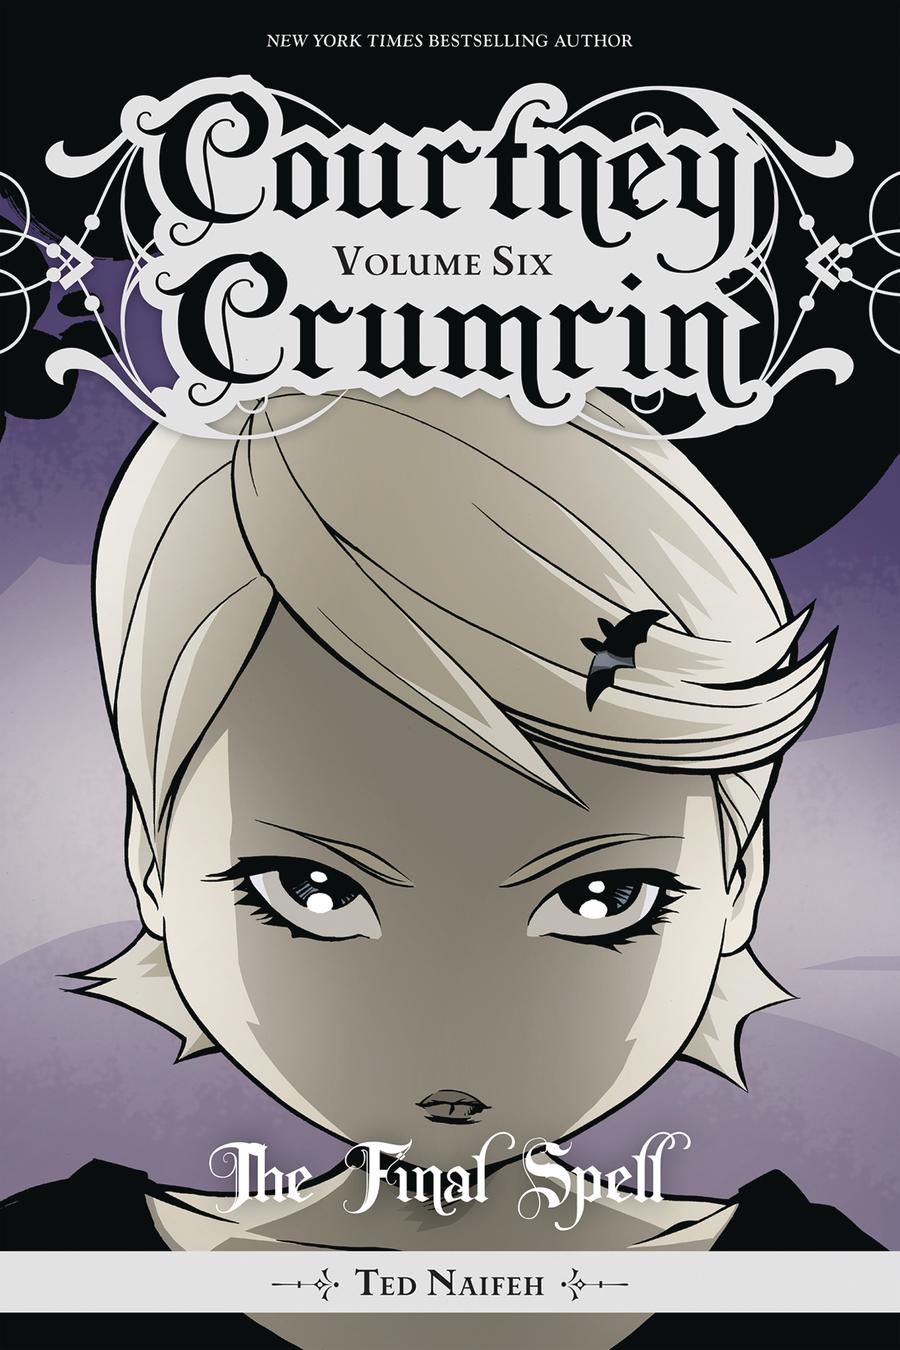 Courtney Crumrin Vol 6 Final Spell TP Special Edition